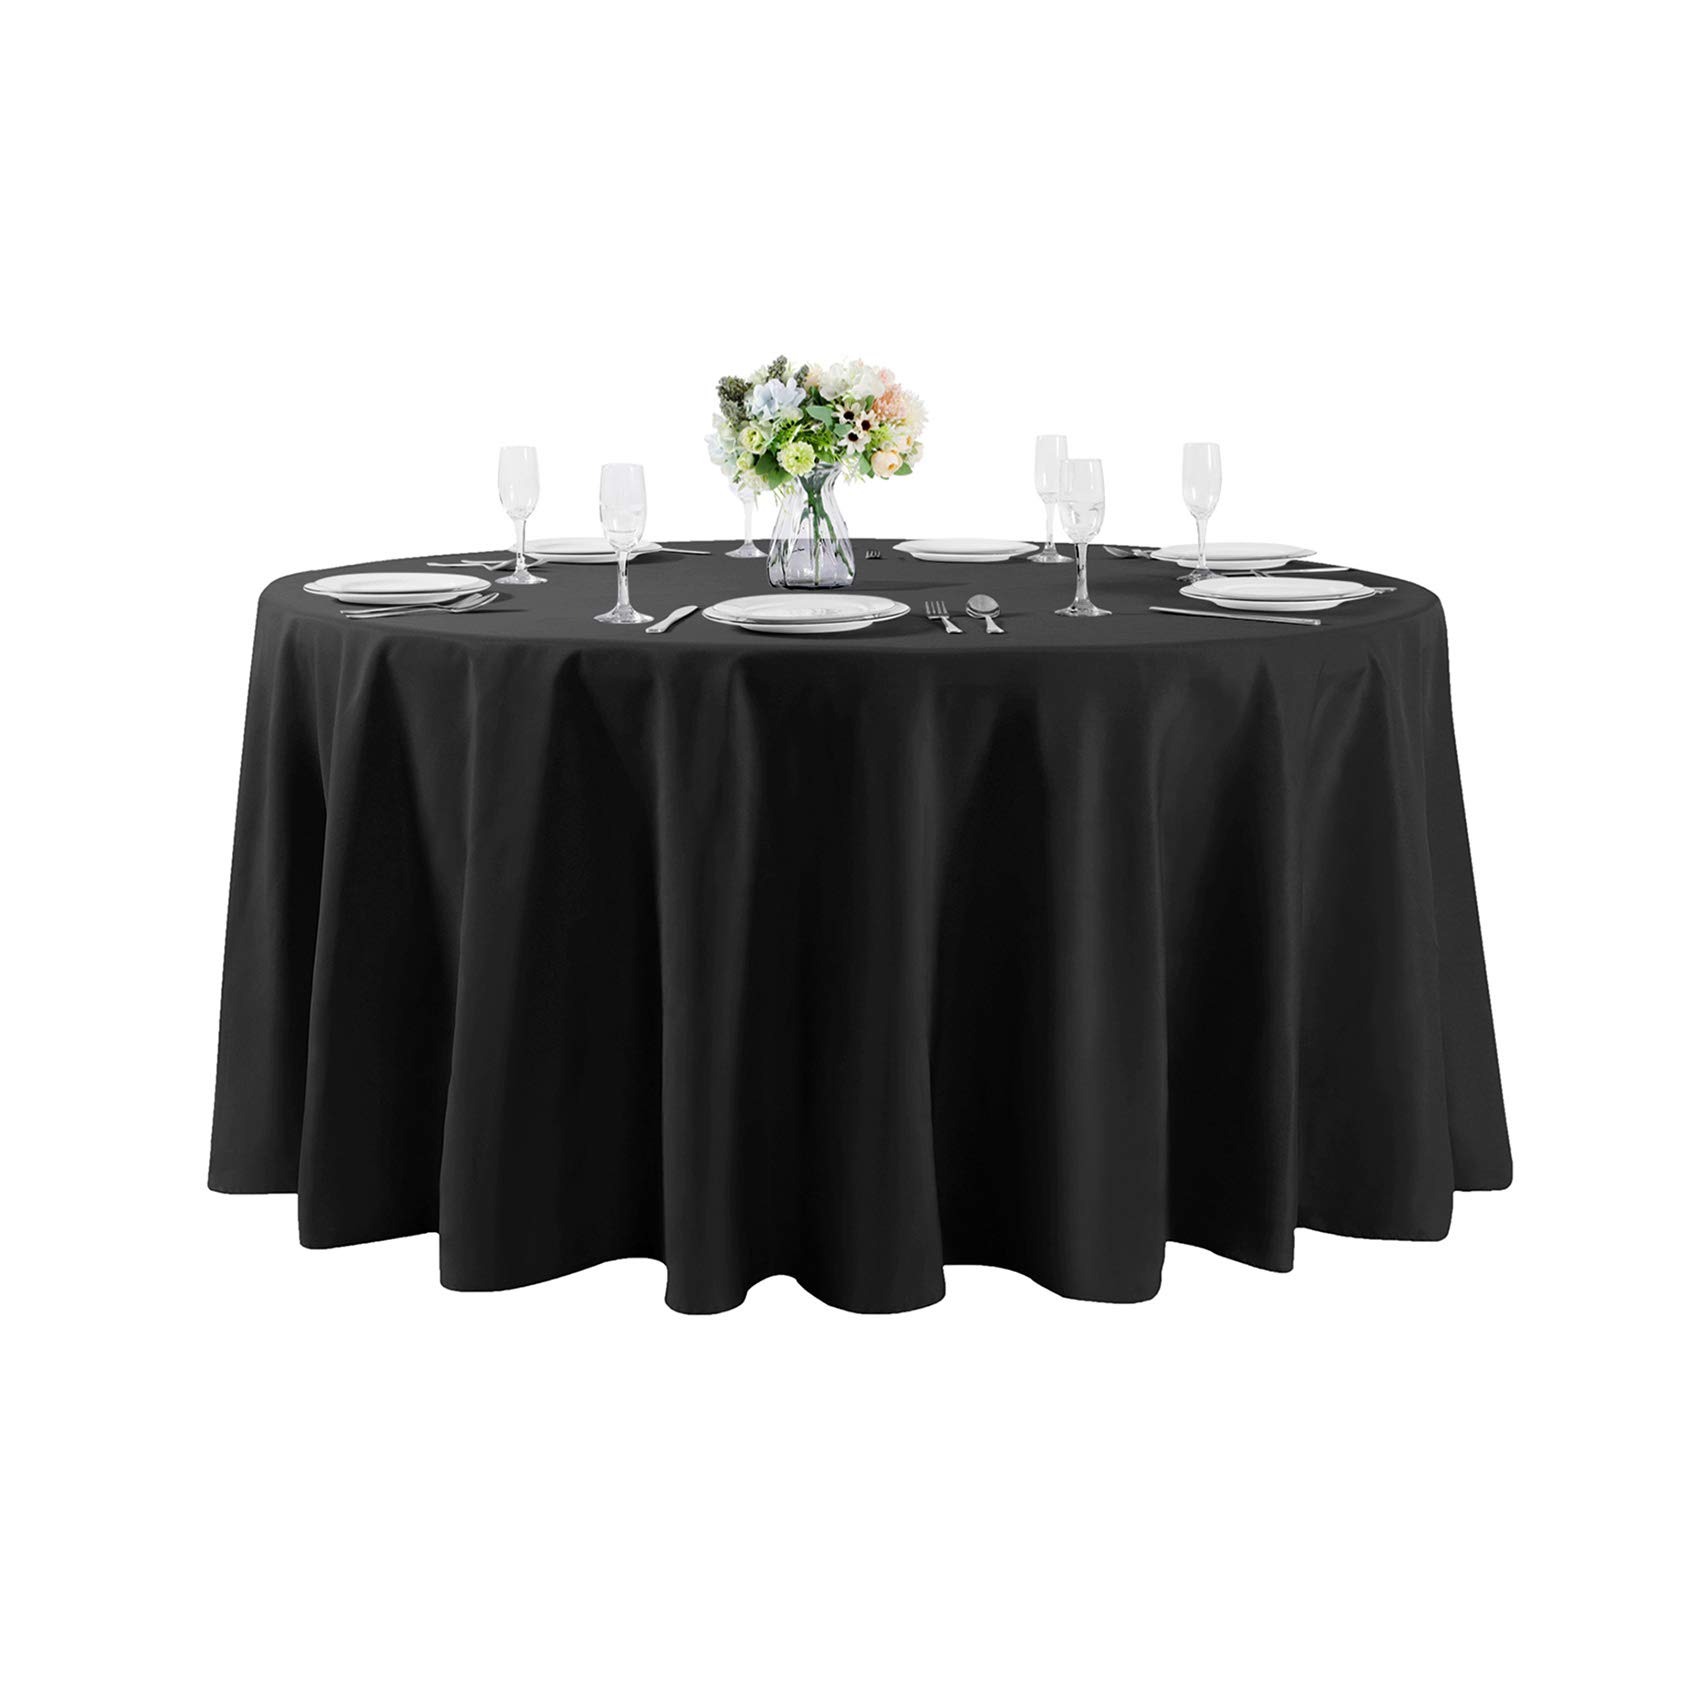 Inherent Flame retardant Table Cover 3-03